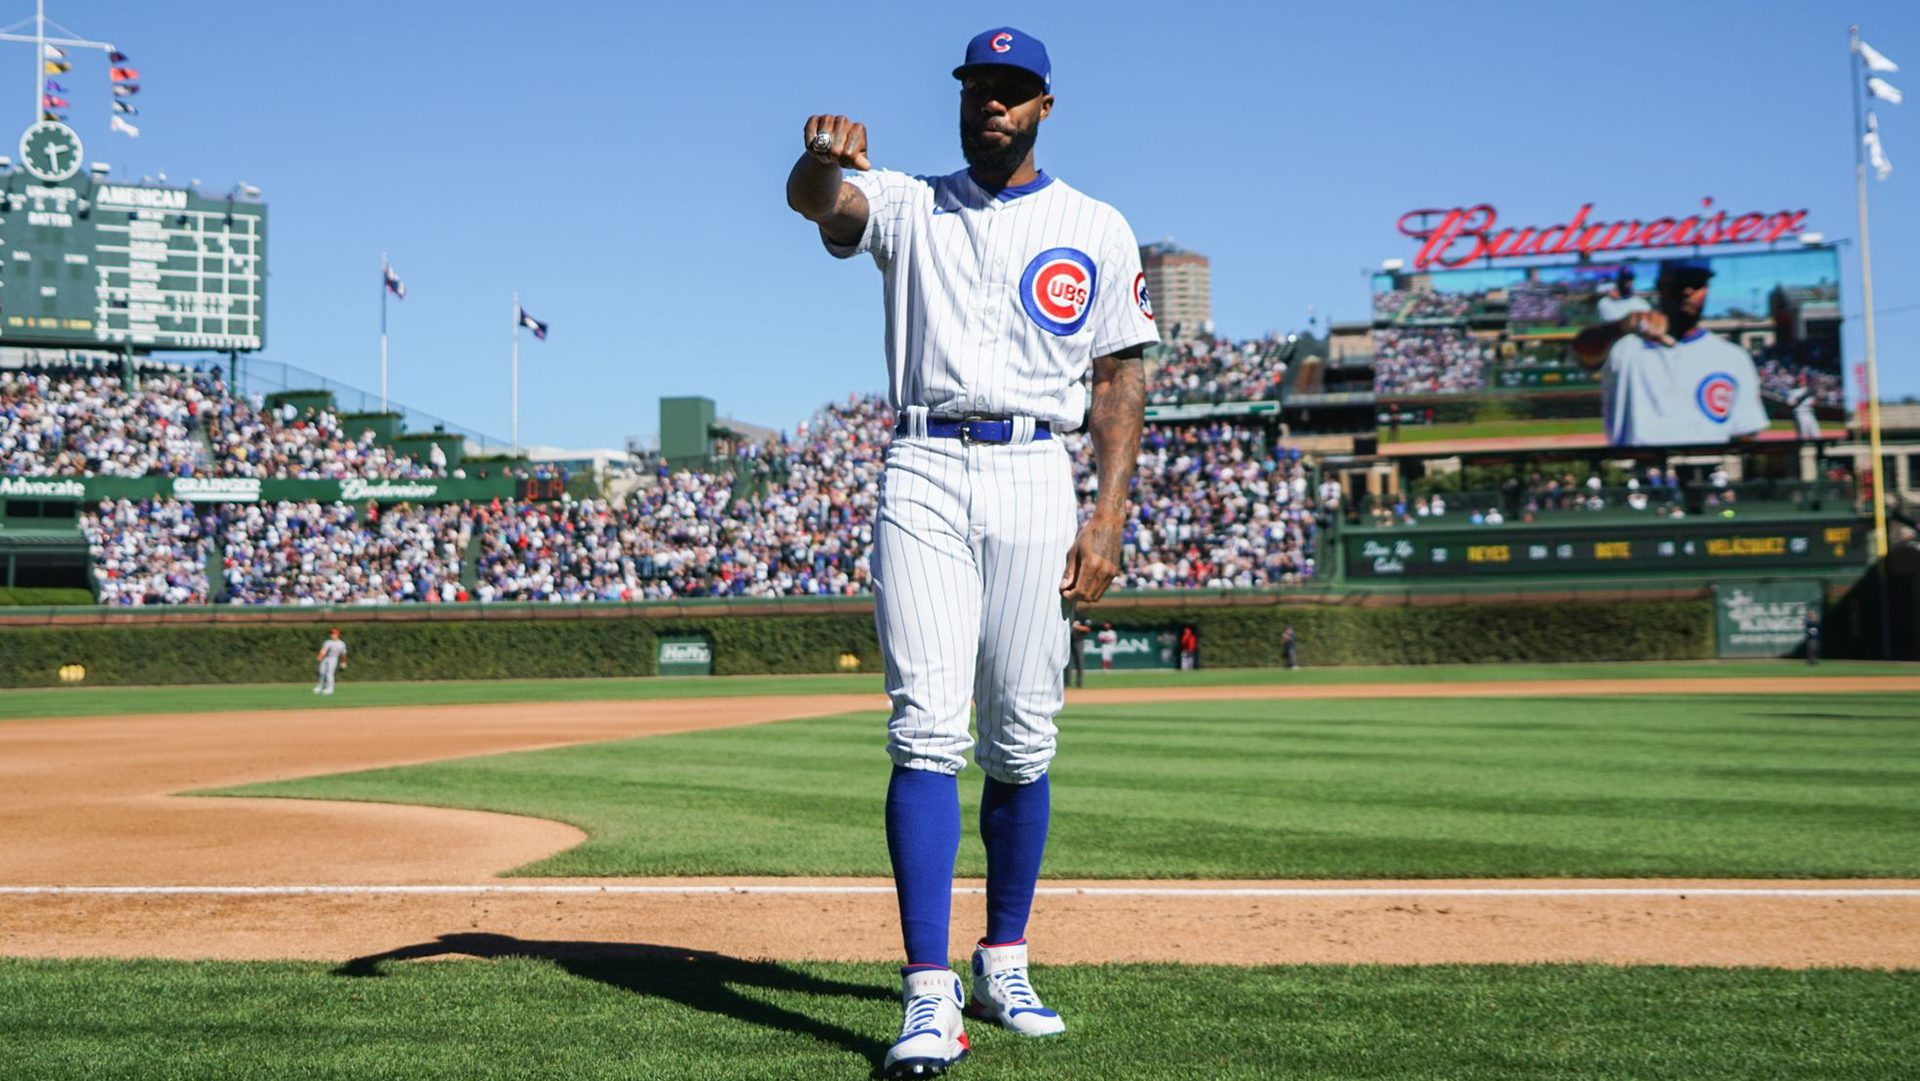 Cubs players, staff explain what made Jason Heyward so special